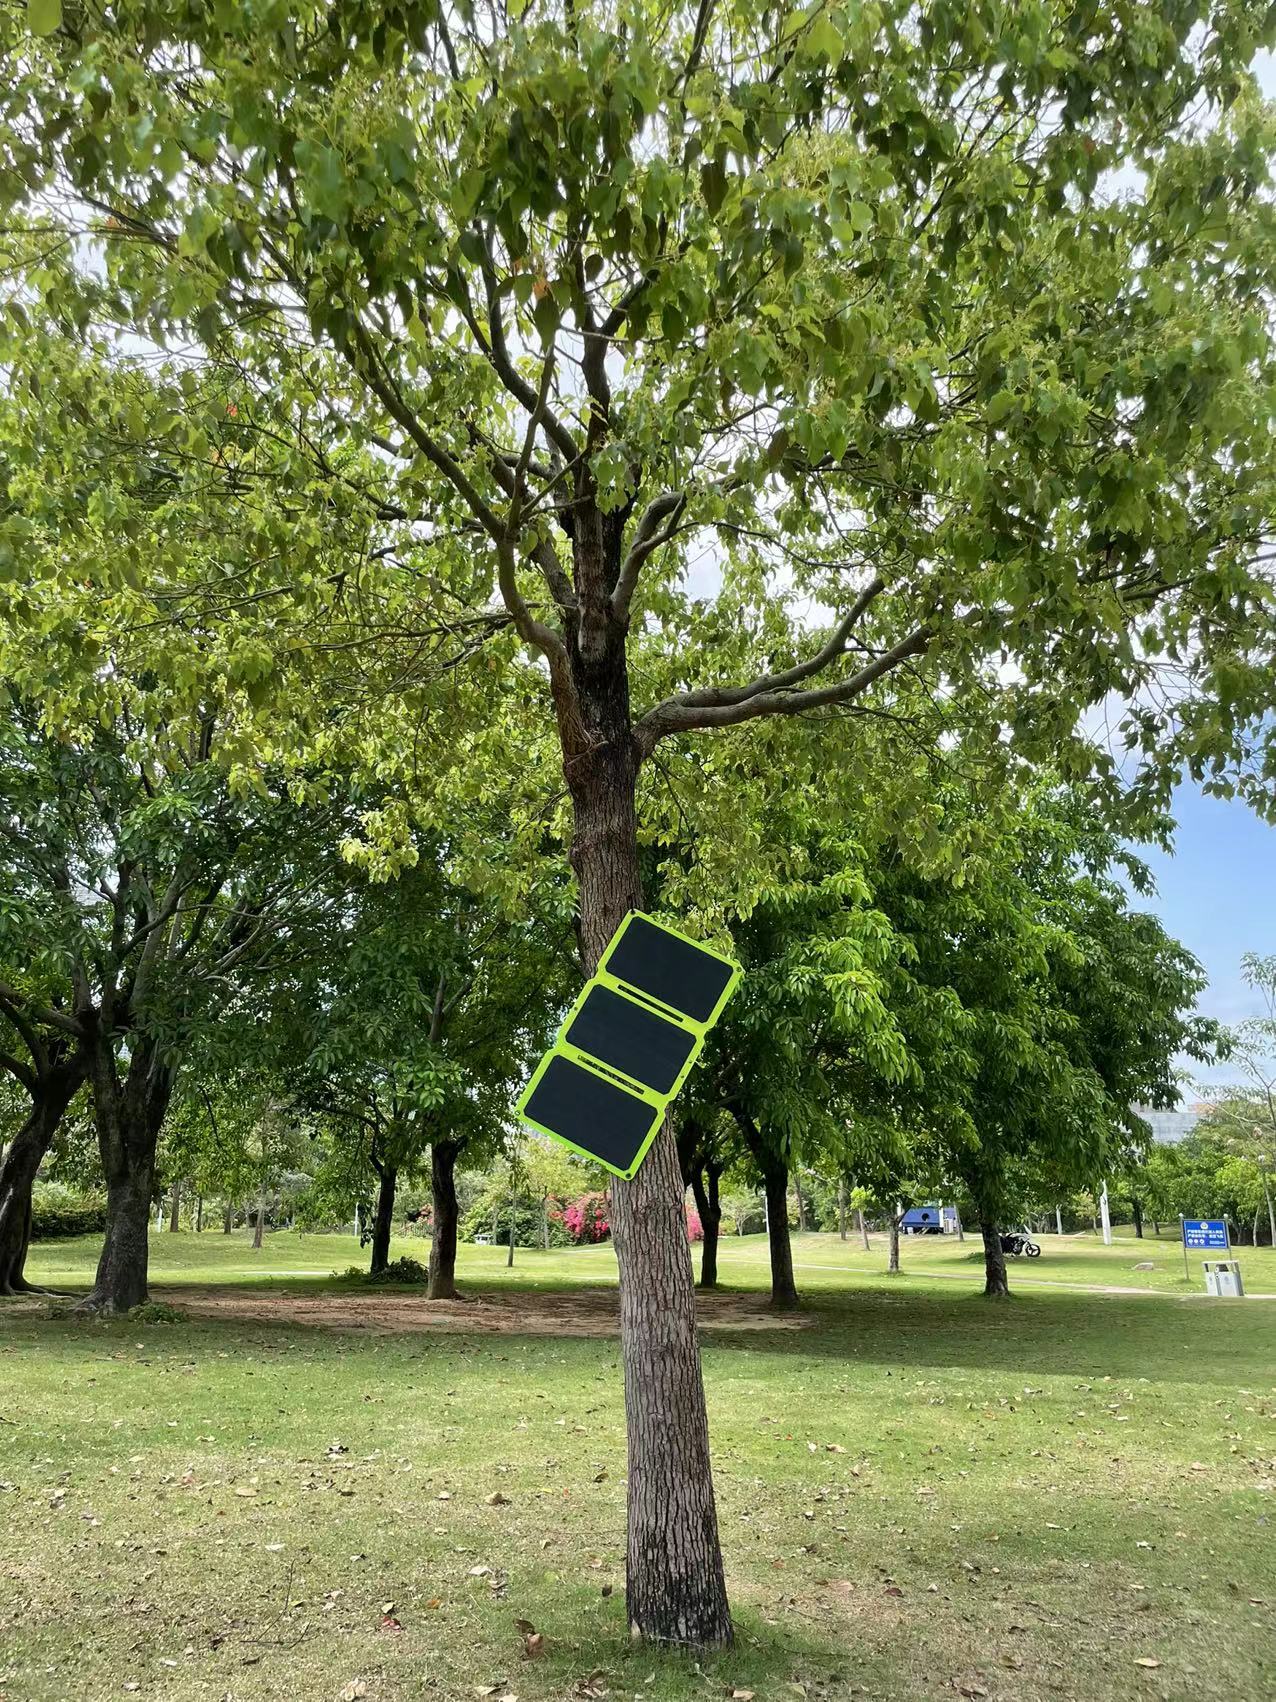 Solar charging panel review: Fearless charging outdoors!